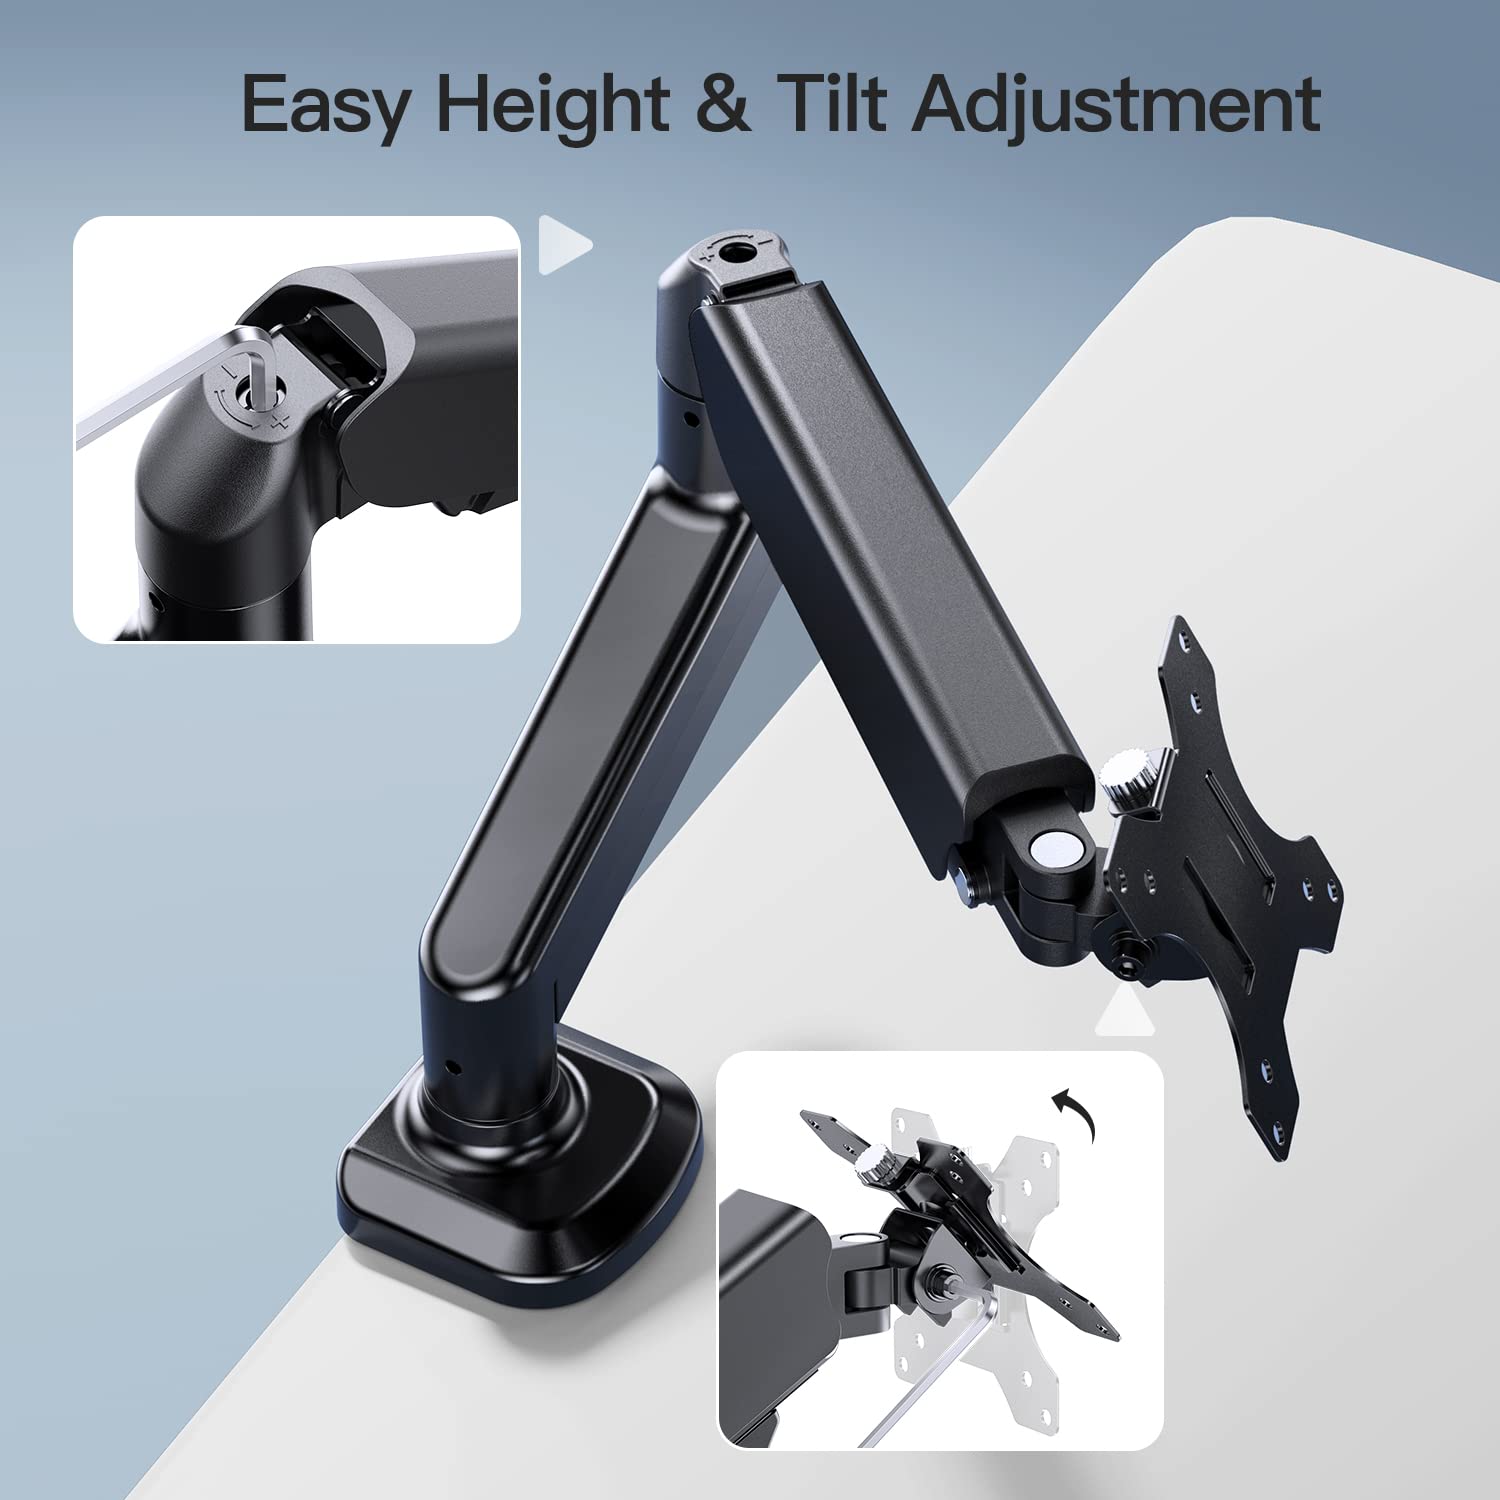 New-Star Adjustable Articulating Gas Spring Monitor Arm with Clamp and Grommet Base for 13 to 27in LCD Monitors upto 14.3lbs